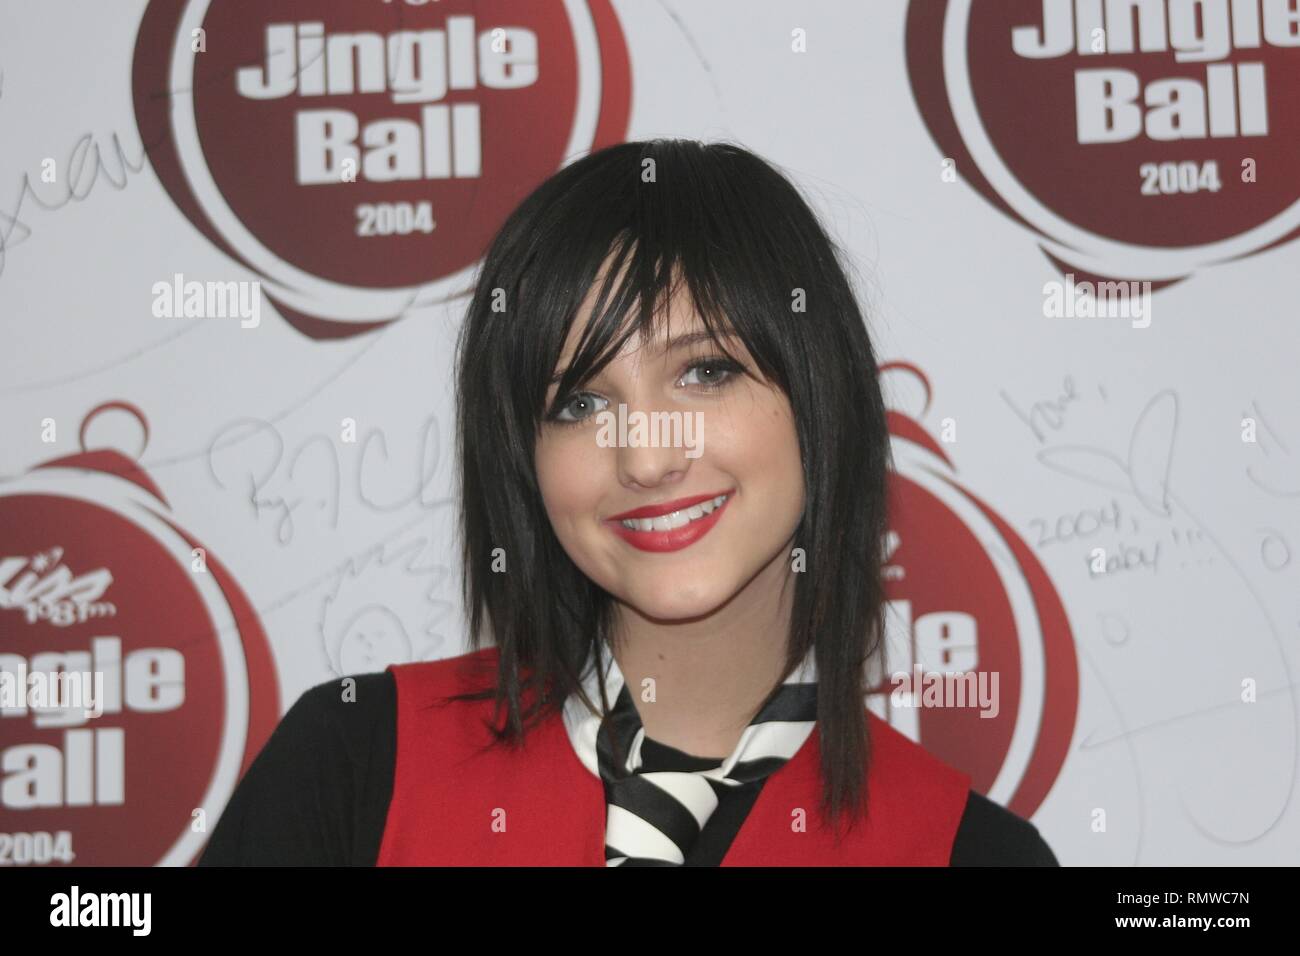 Singer Ashlee Simpson-Wentz is shown at a press conference that followed her 'live' concert appearance. Stock Photo